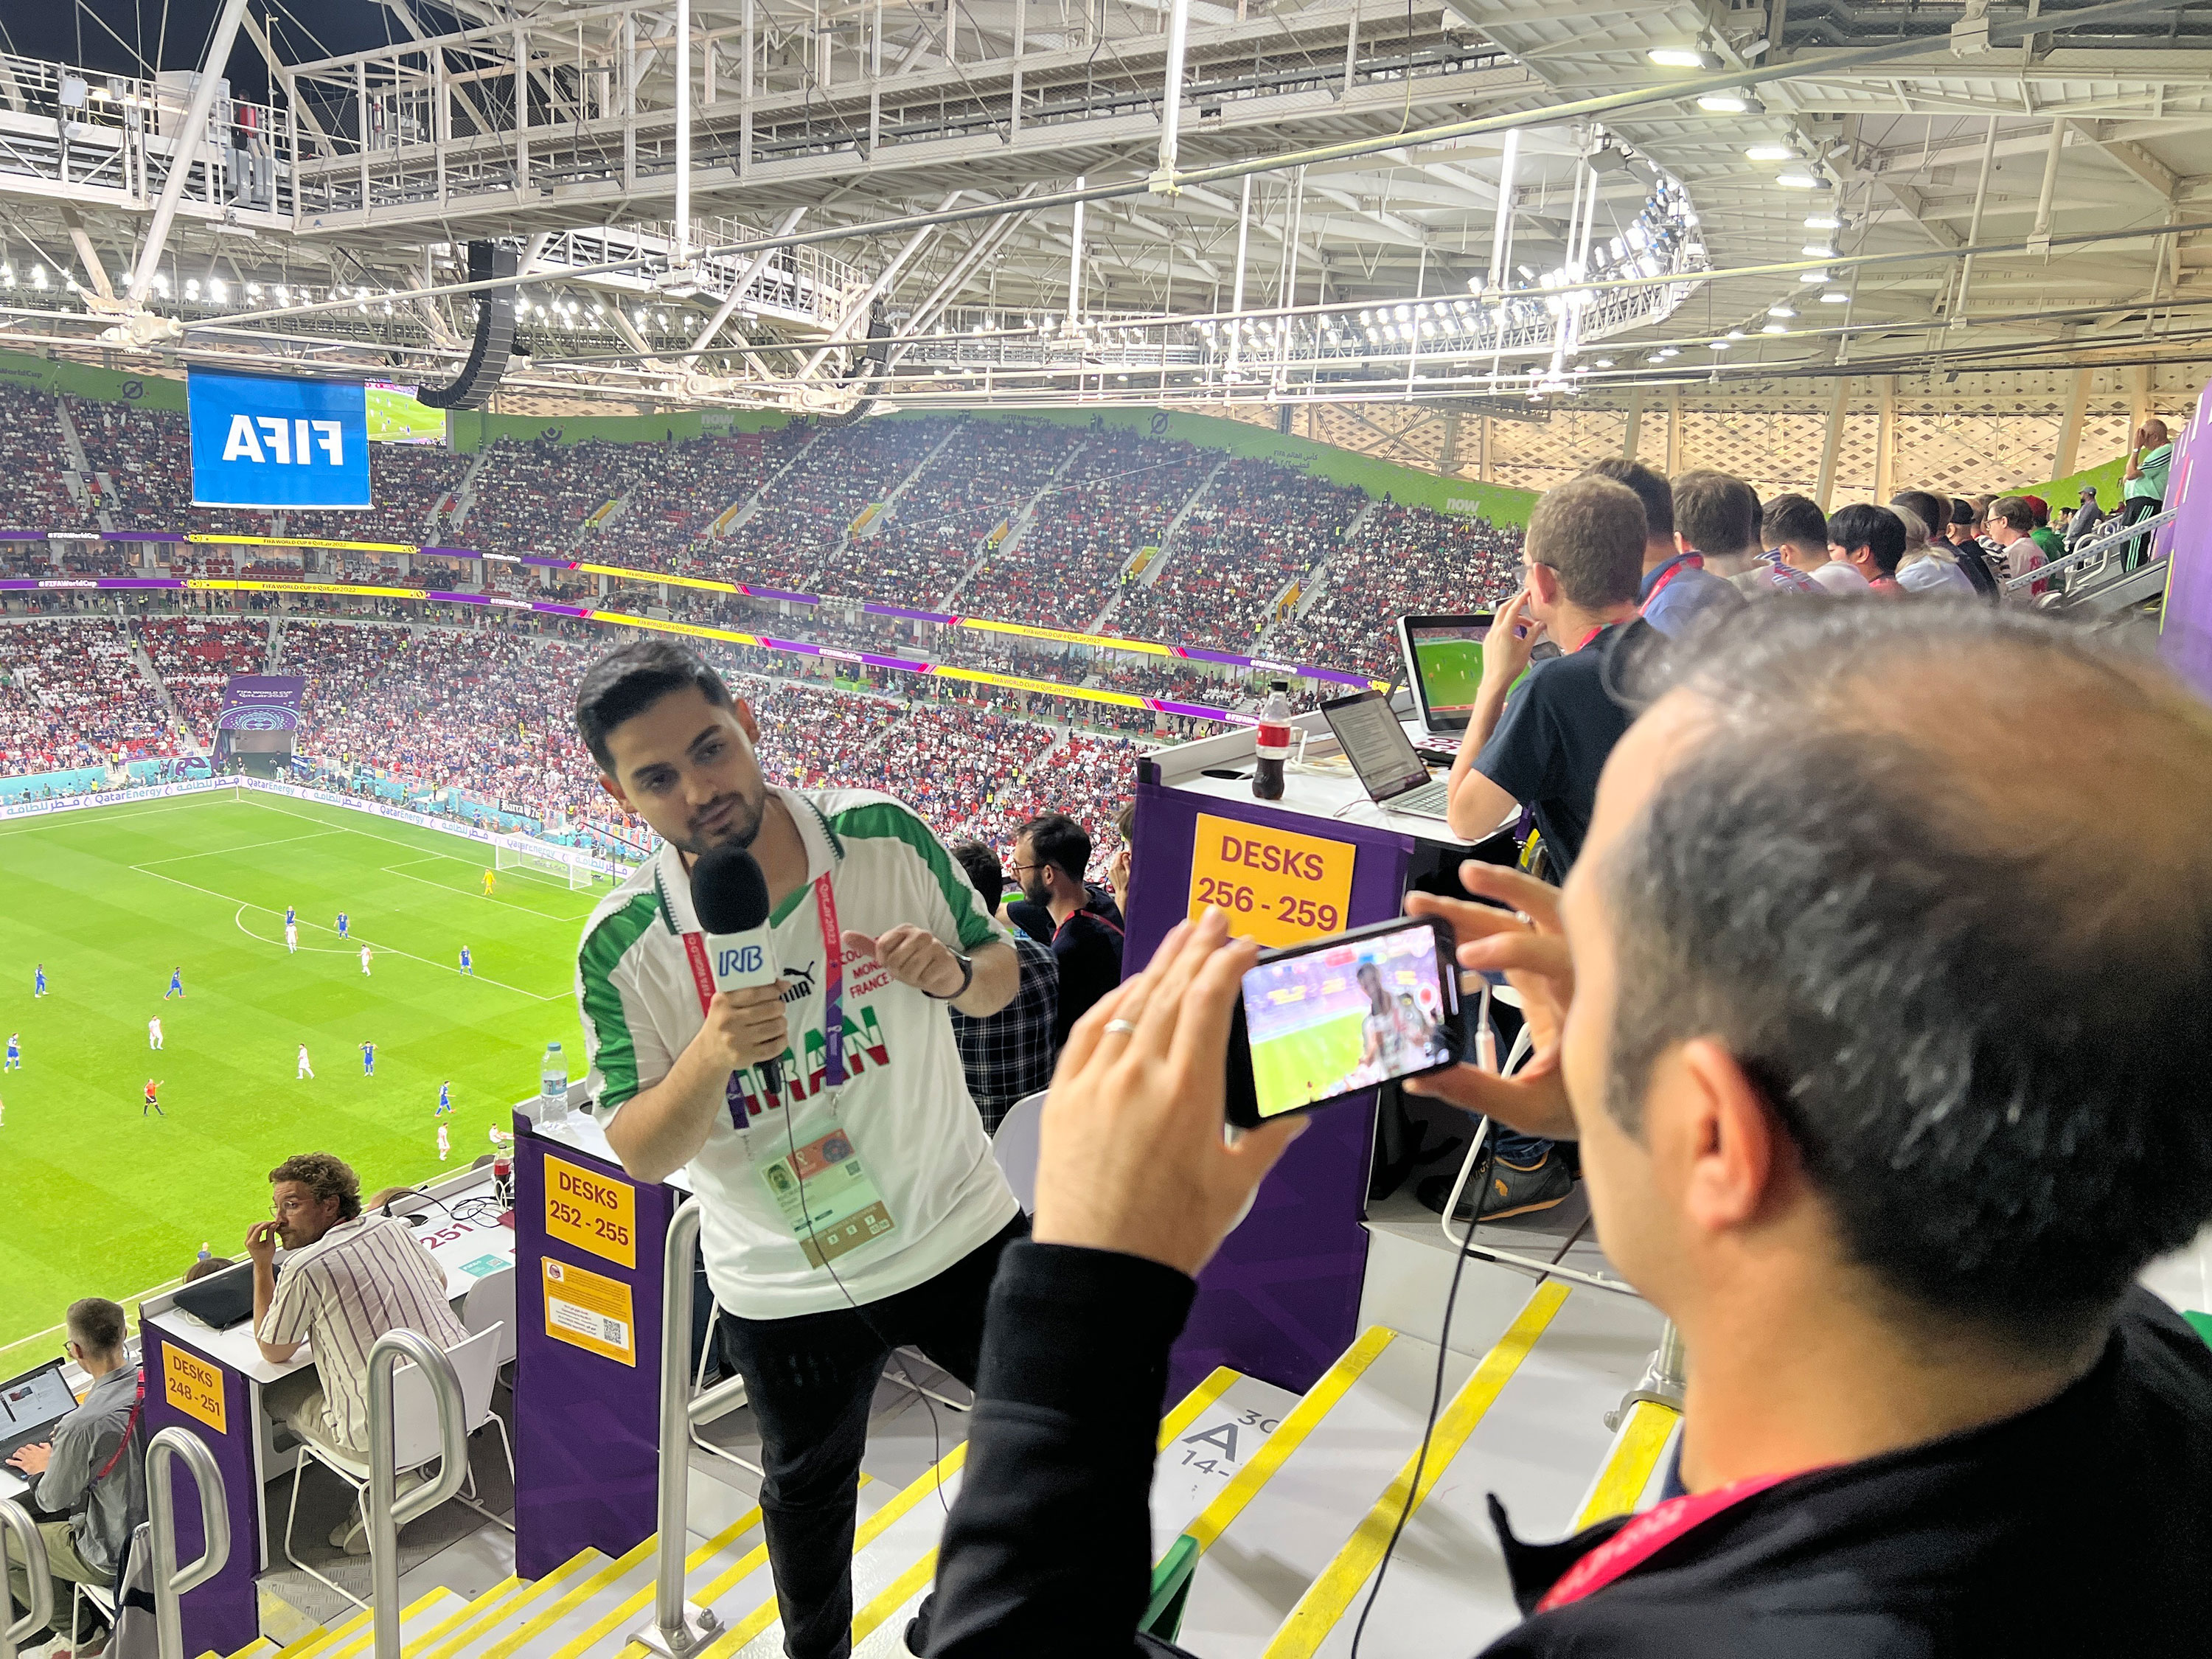 Iran state media (IRIB) reporting from inside the game and wearing the 1998 World Cup shirt. They’ll be hoping for a repeat of that night in France, when Iran knocked out the USA.